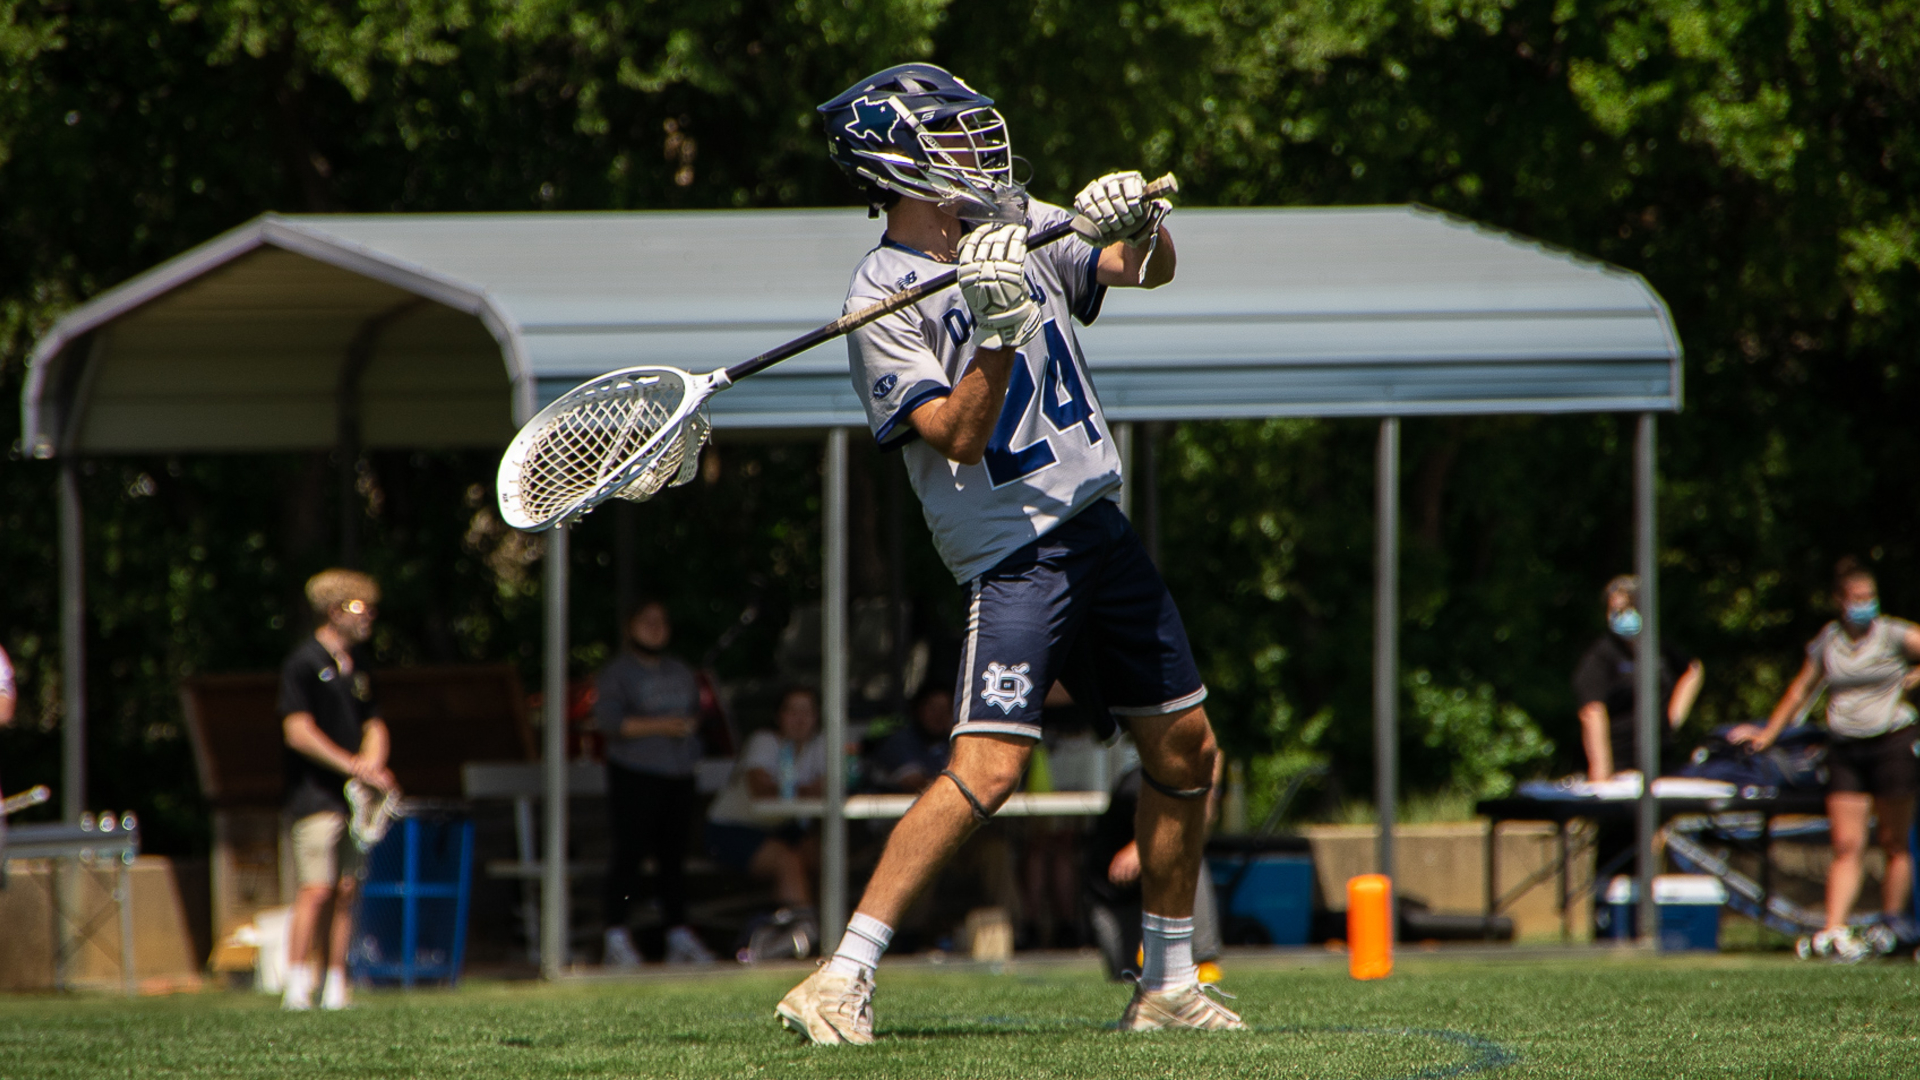 2021 UD Top Performance: White Grabs UD Career Saves Record for Men's Lacrosse